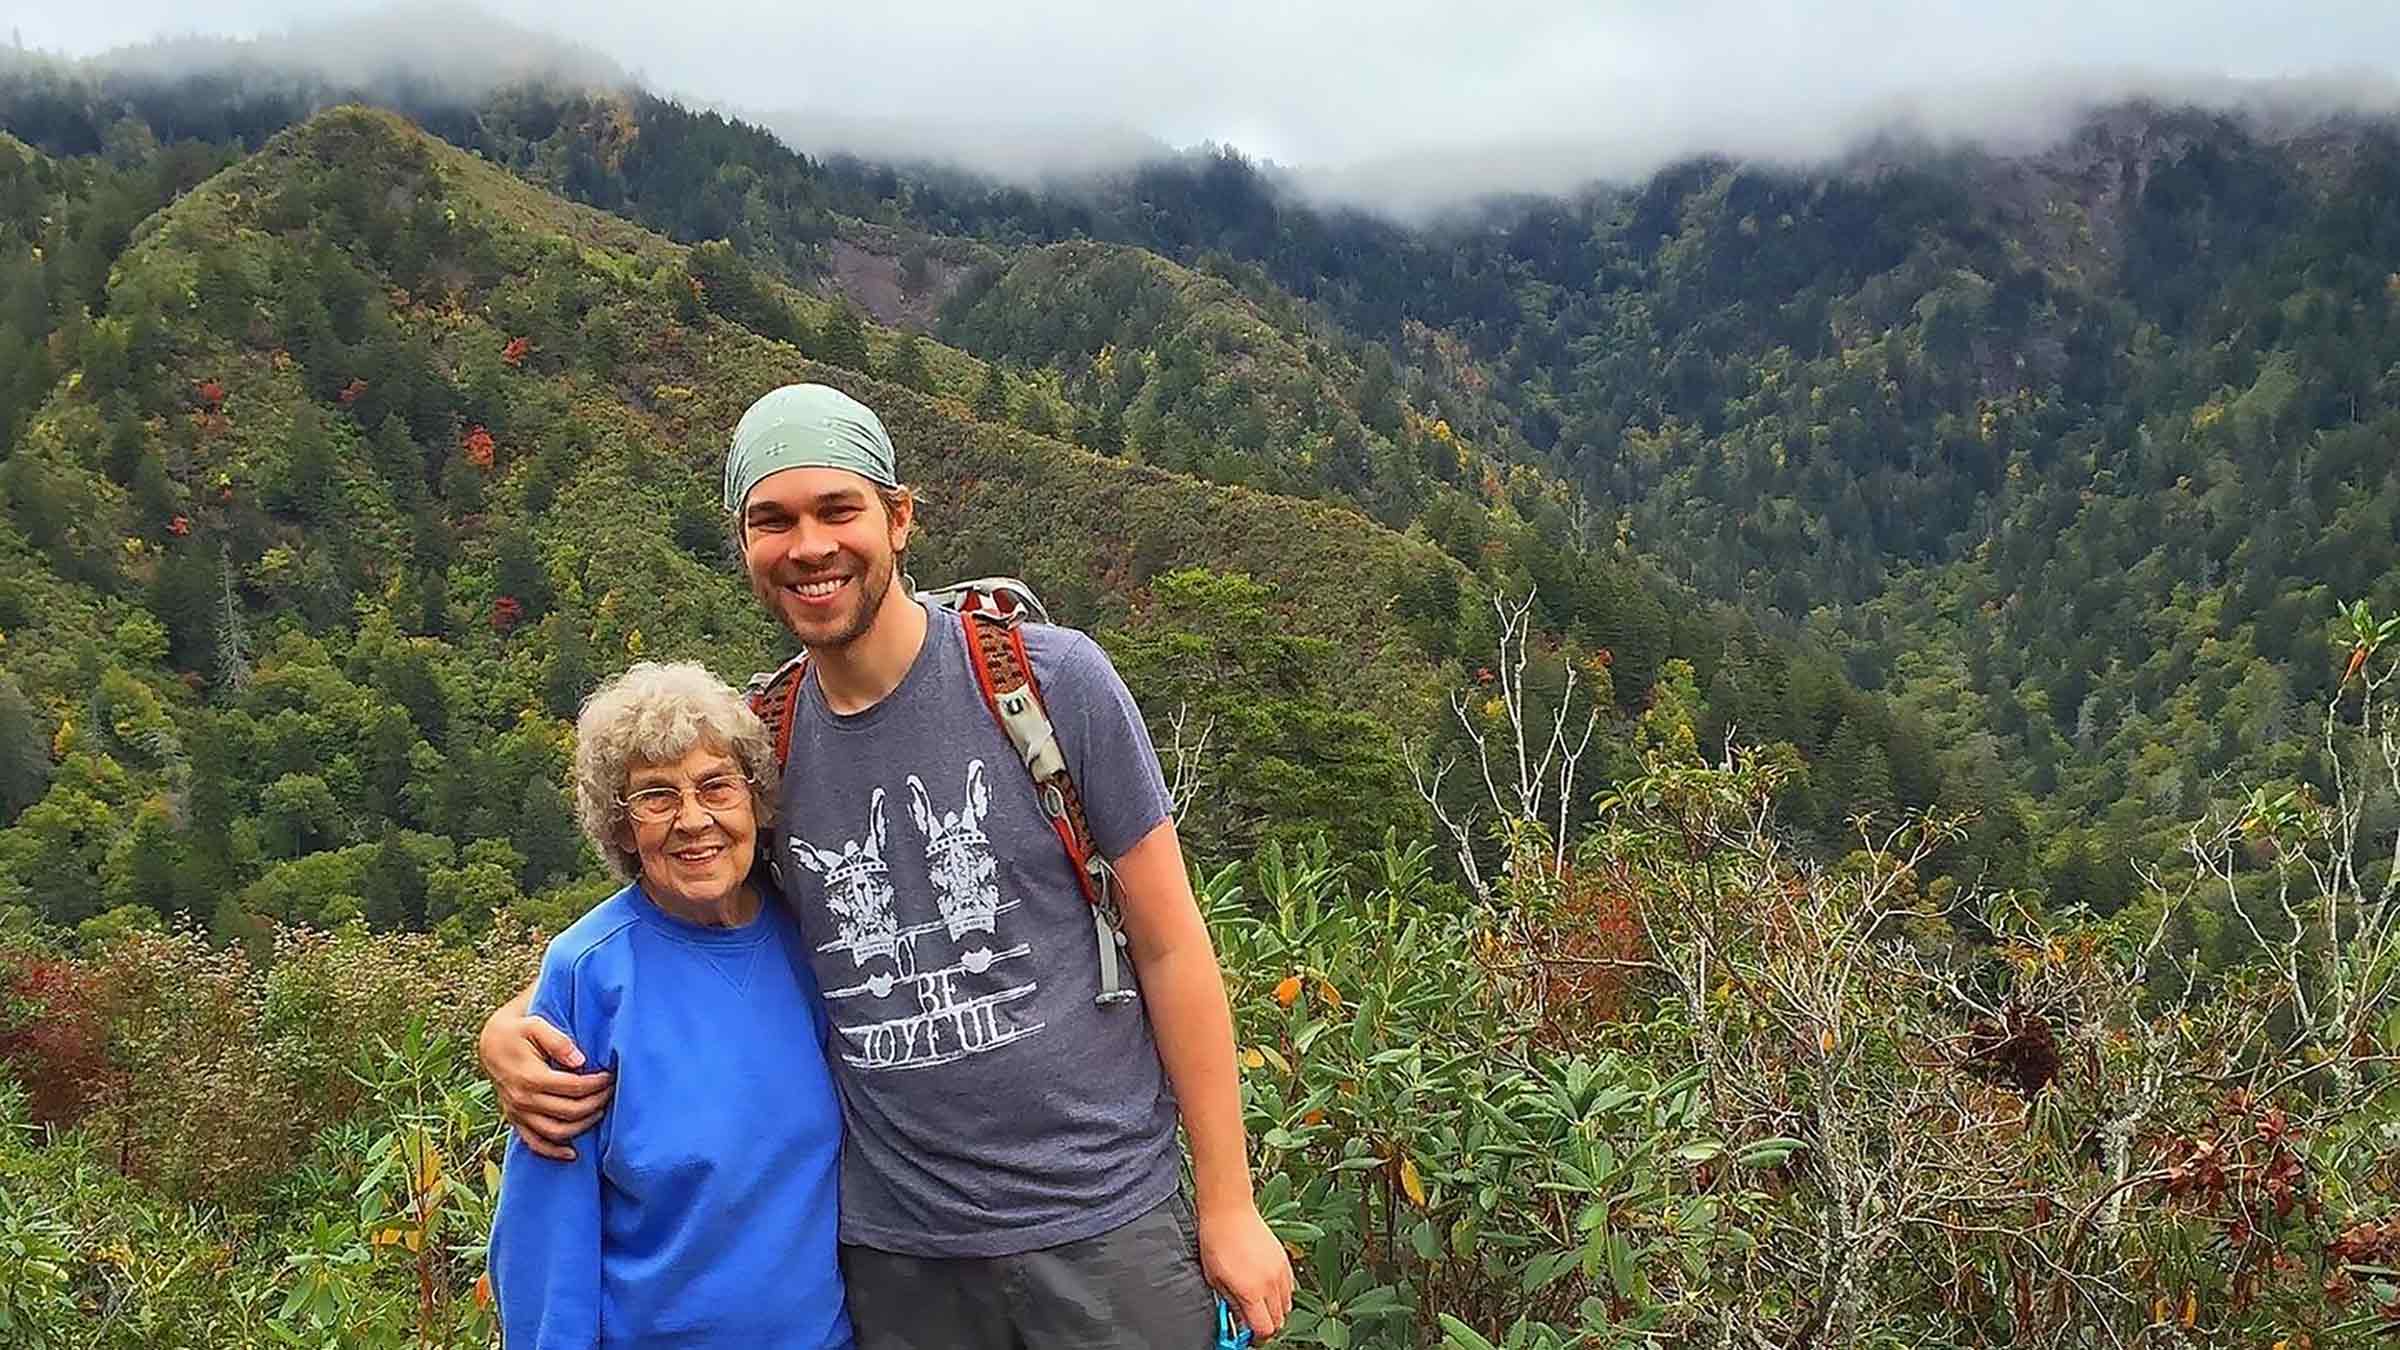 Brad Ryan and his grandmother with the forrest in the background